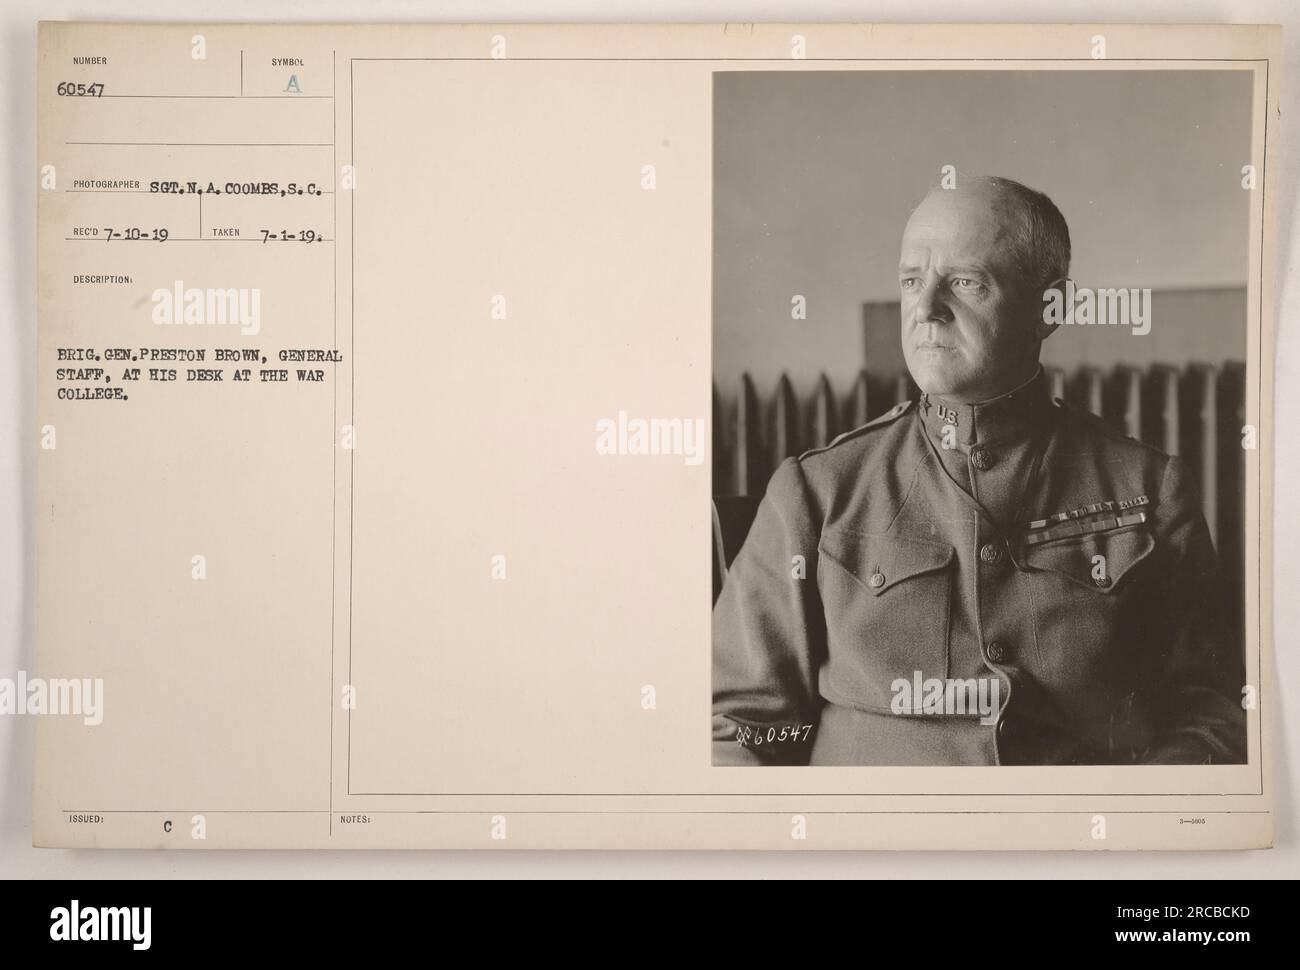 Brig. Gen. Preston Brown seen at his desk at the War College. The photograph was taken on July 1, 1919, by the photographer Sot. N. A. Coombs. Gen. Brown, who was part of the General Staff, was captured in this image while performing his duties at the War College. Stock Photo